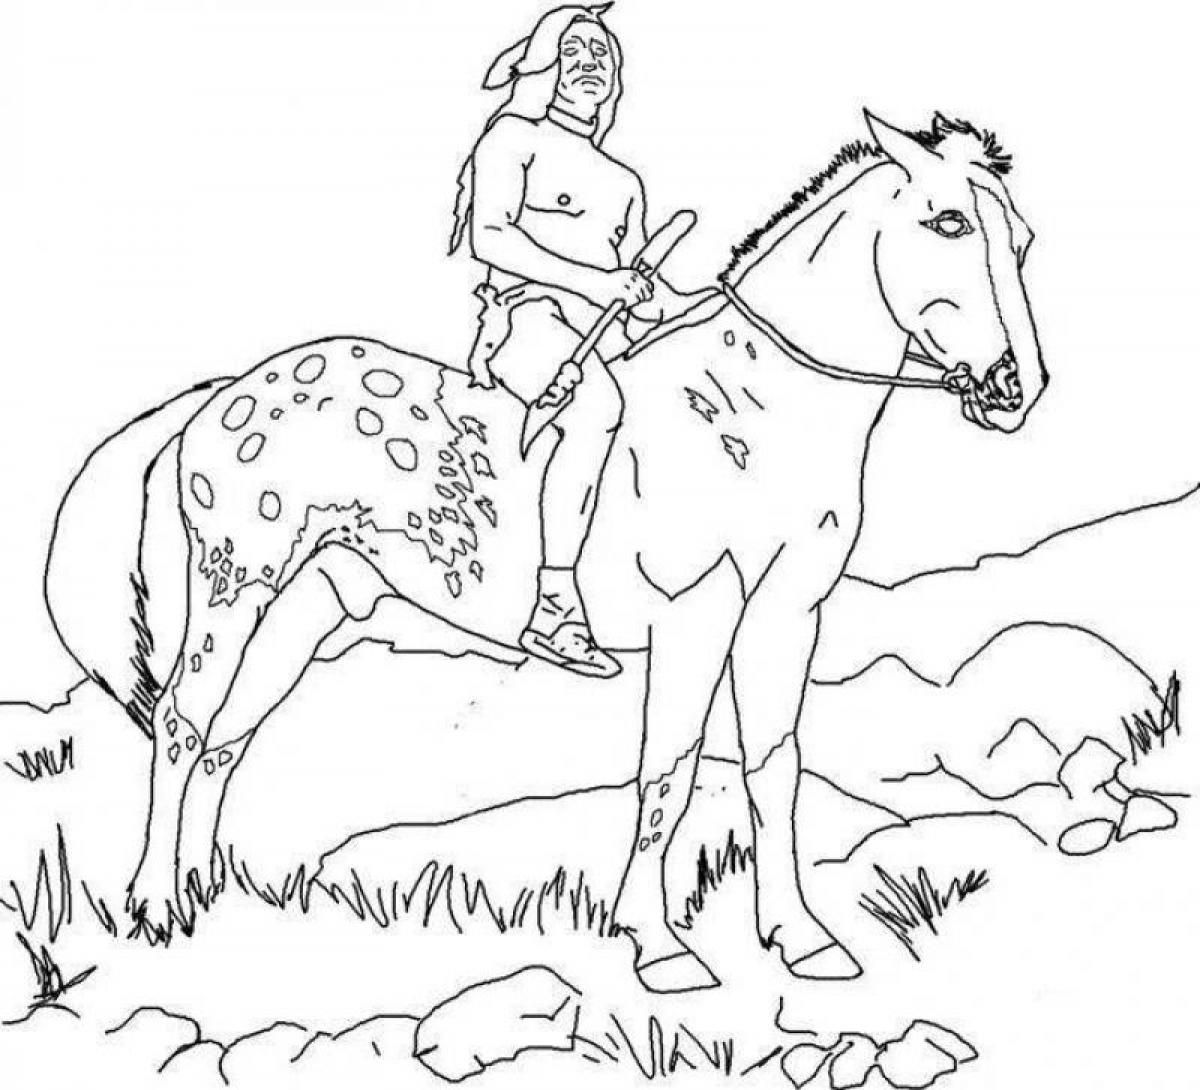  Native American Girl Coloring Pages - Native American